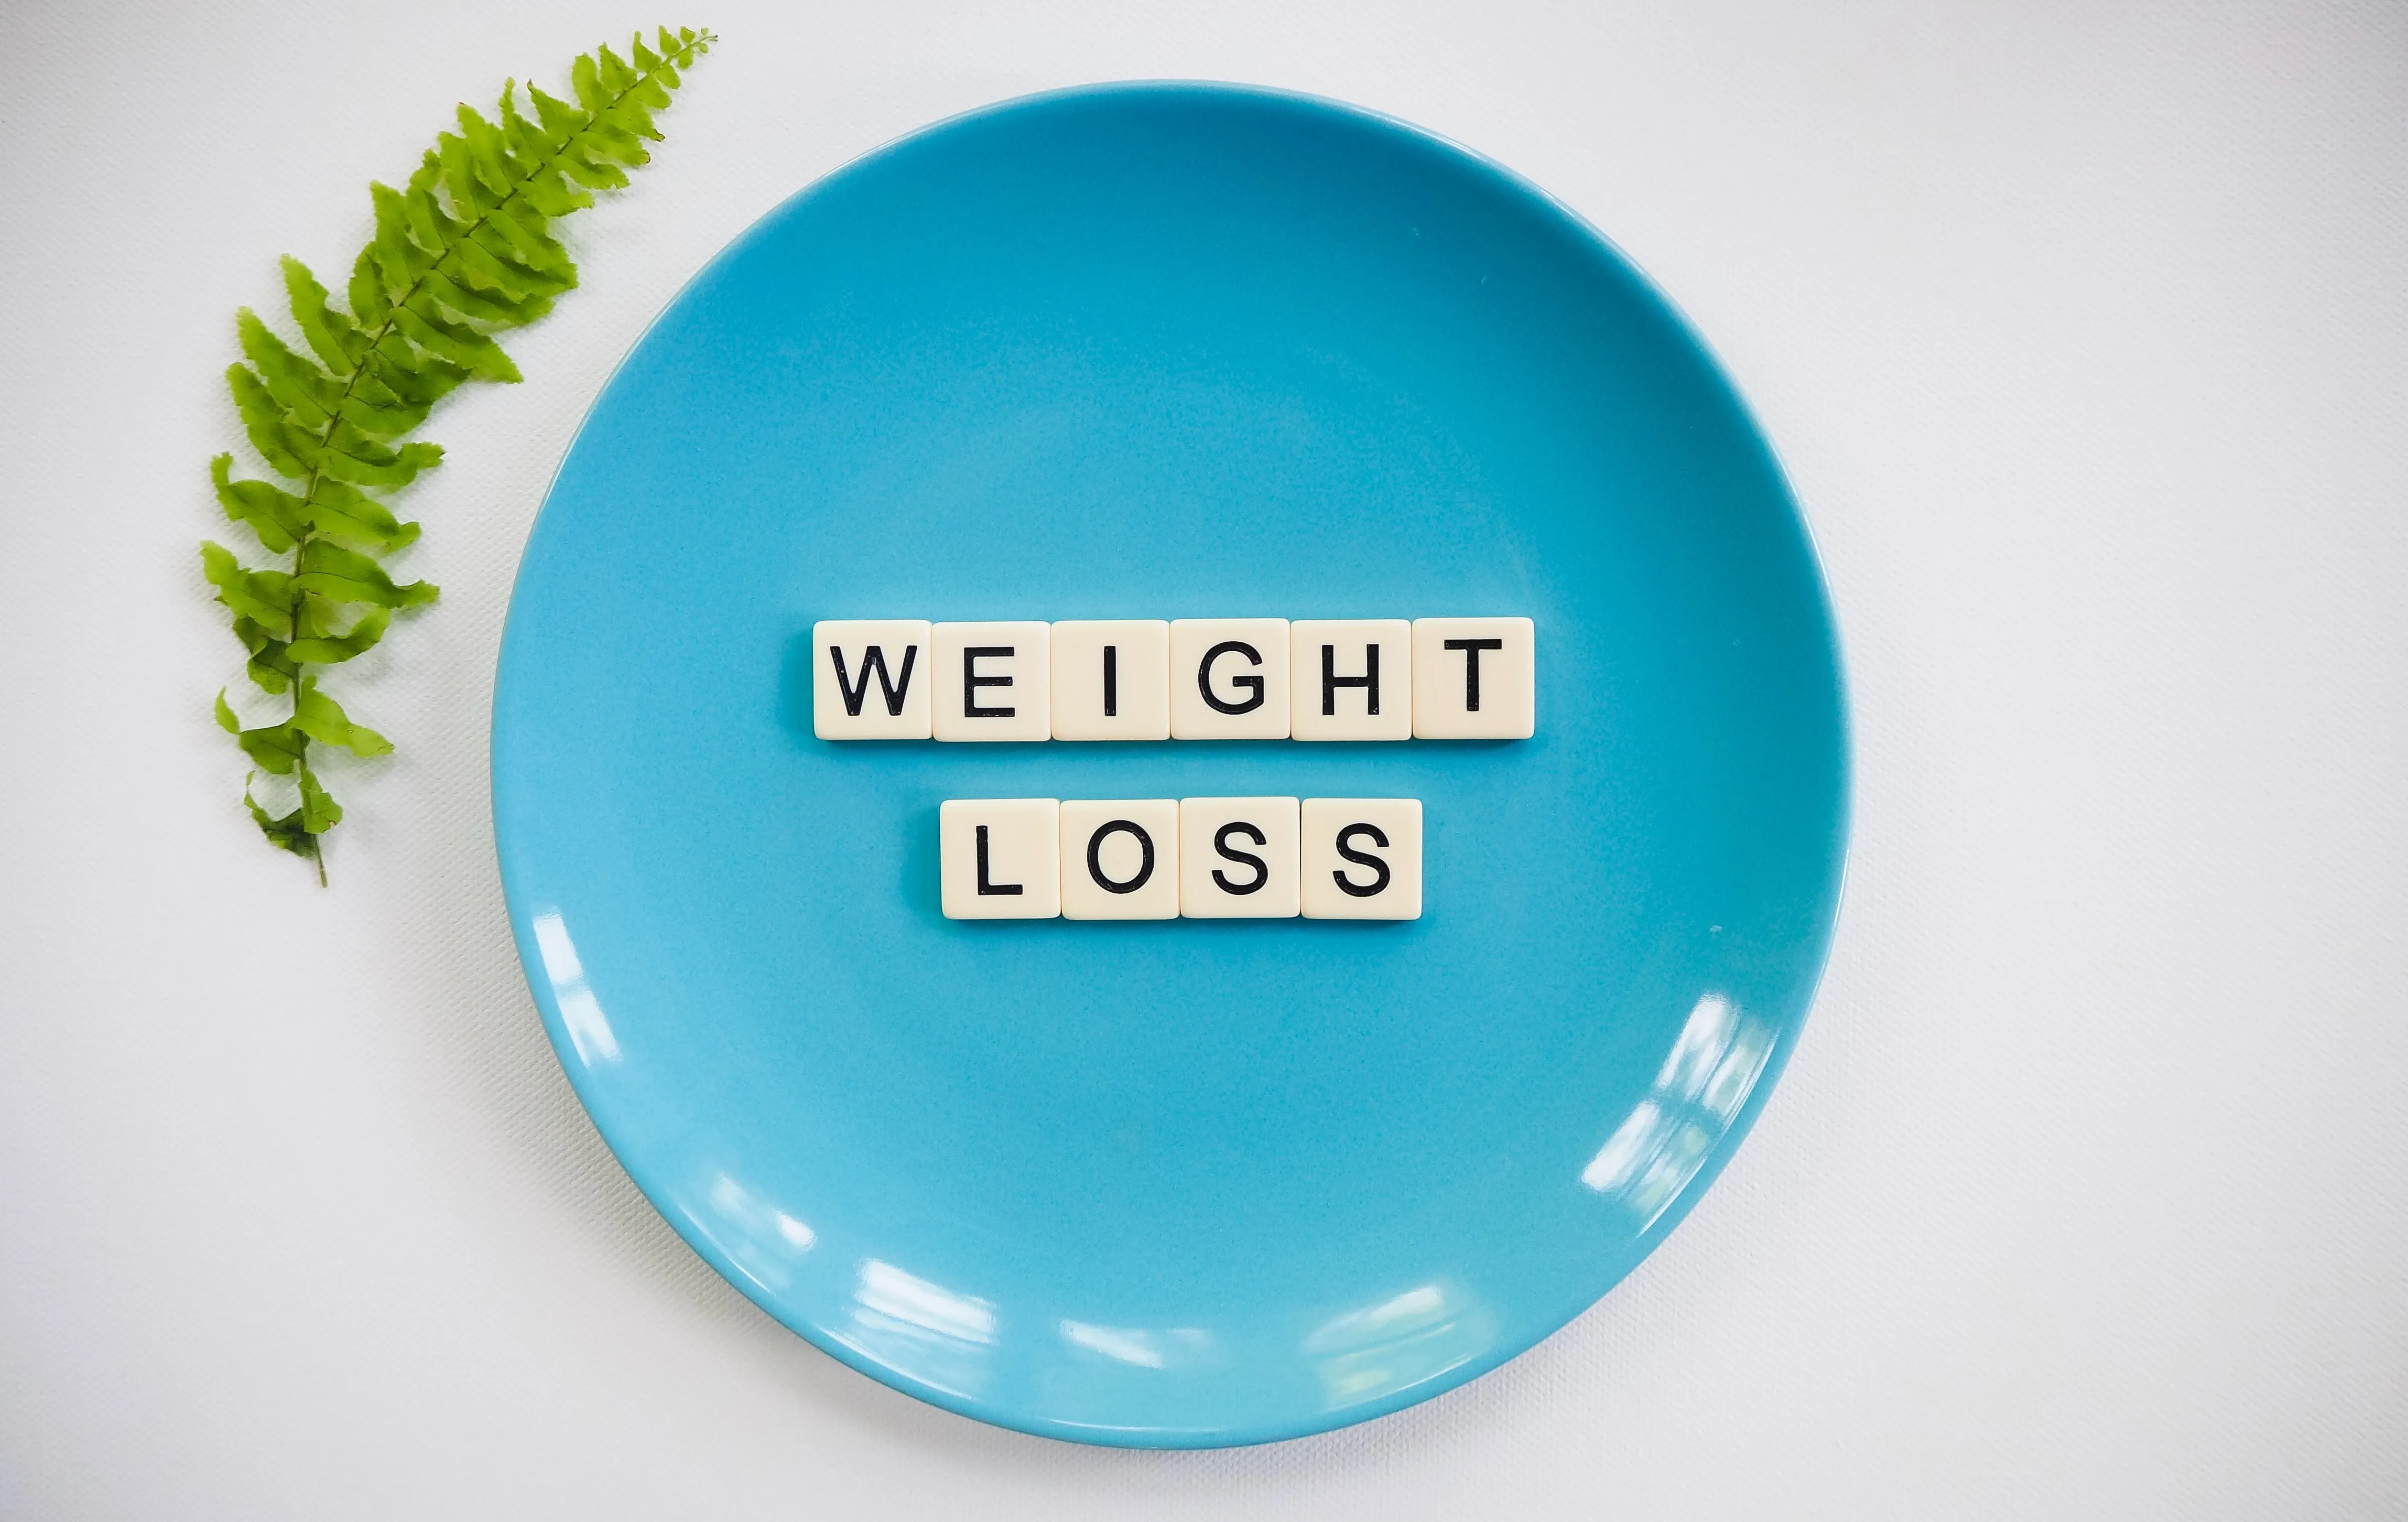 weight loss spelt out on a plate.